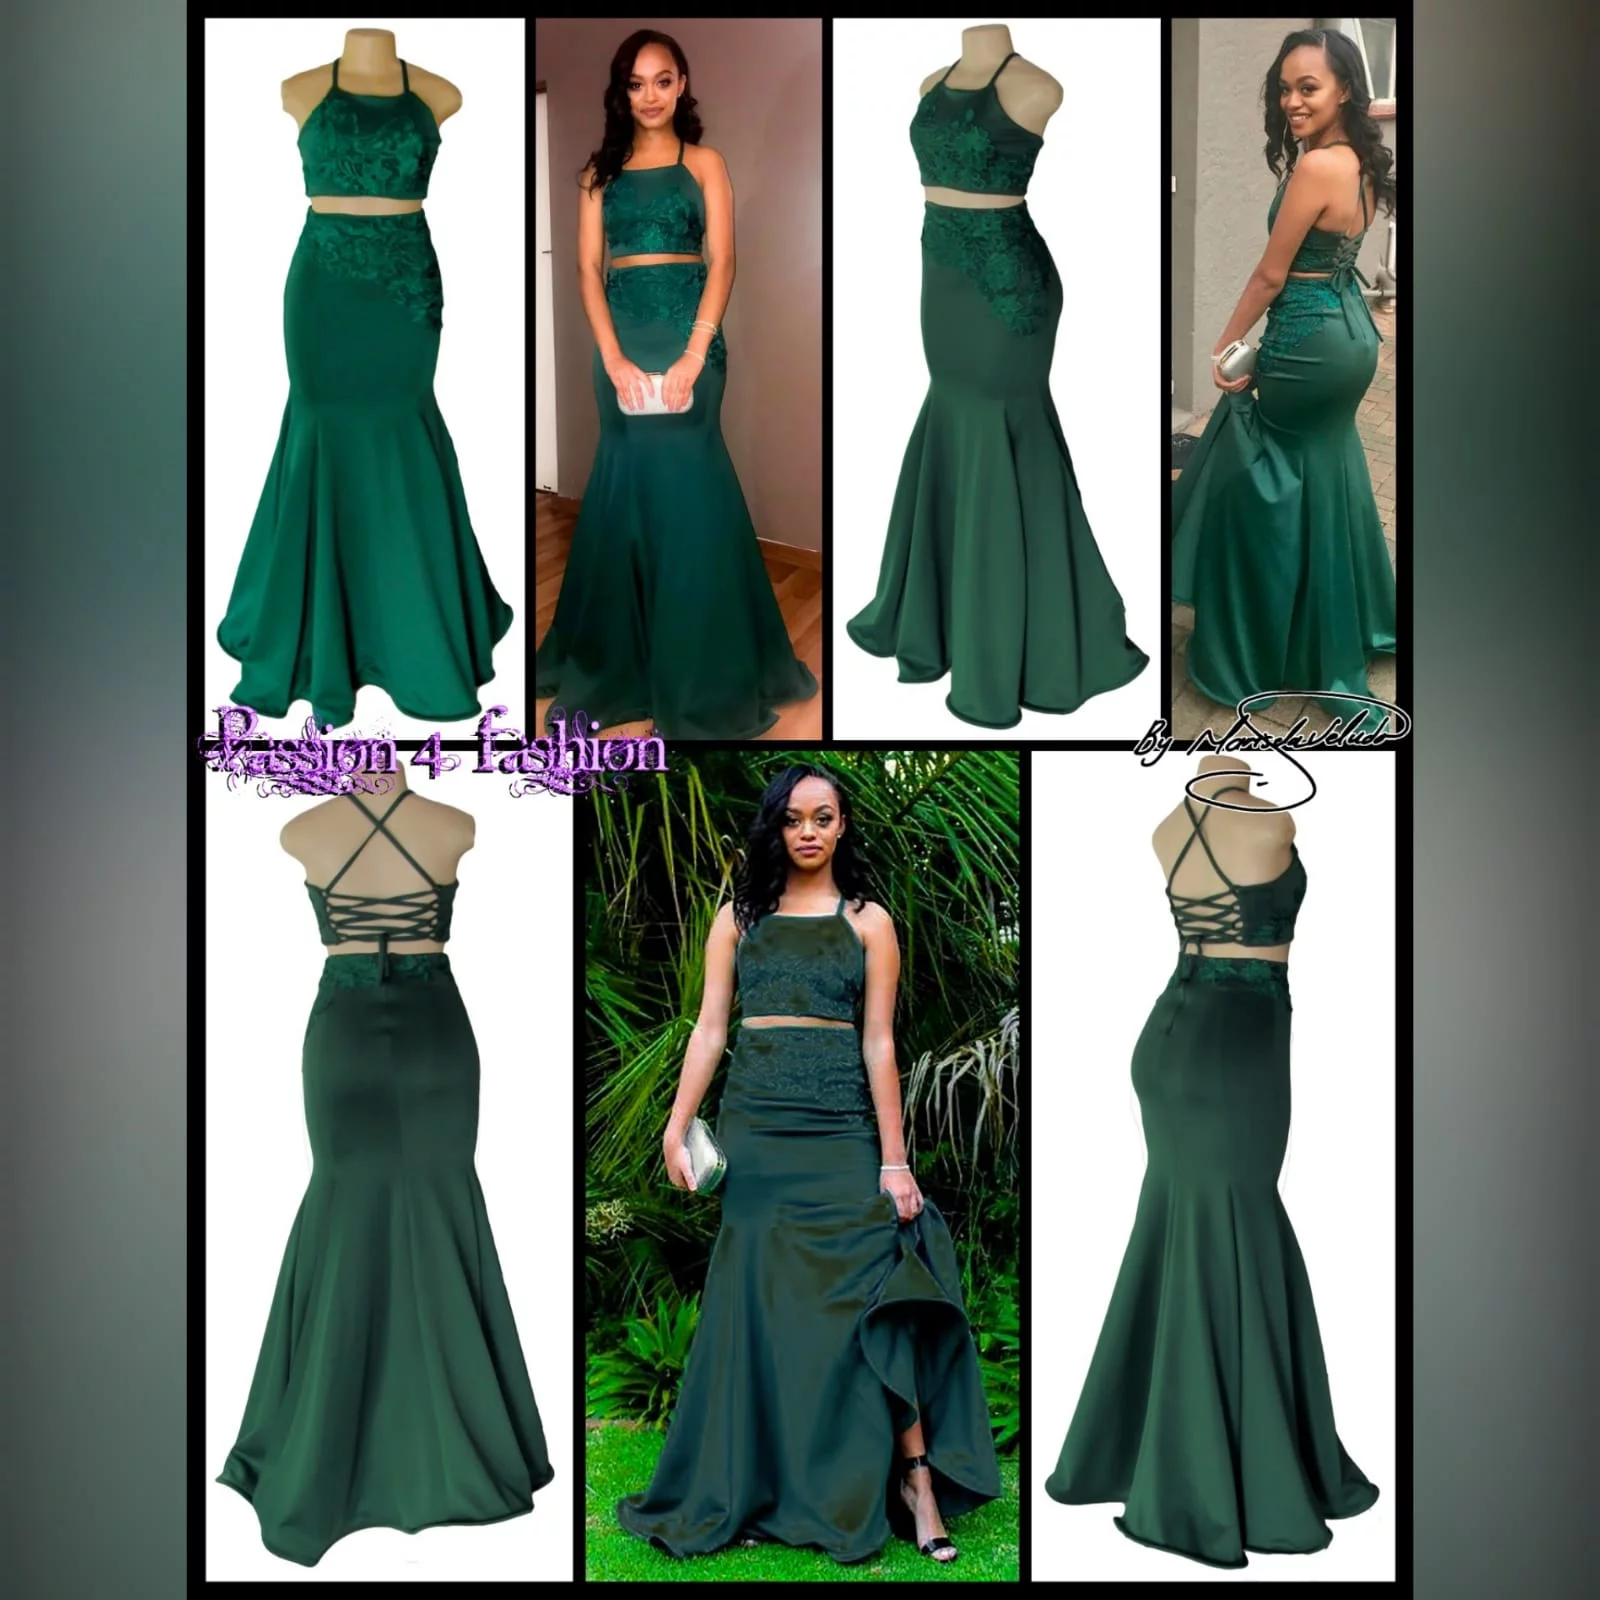 2 piece emerald green mermaid prom dress 7 2 piece emerald green mermaid prom dress. A gorgeous crop top with a lace-up open back, with a mermaid skirt. Lace detail on skirt and top for a classic touch.